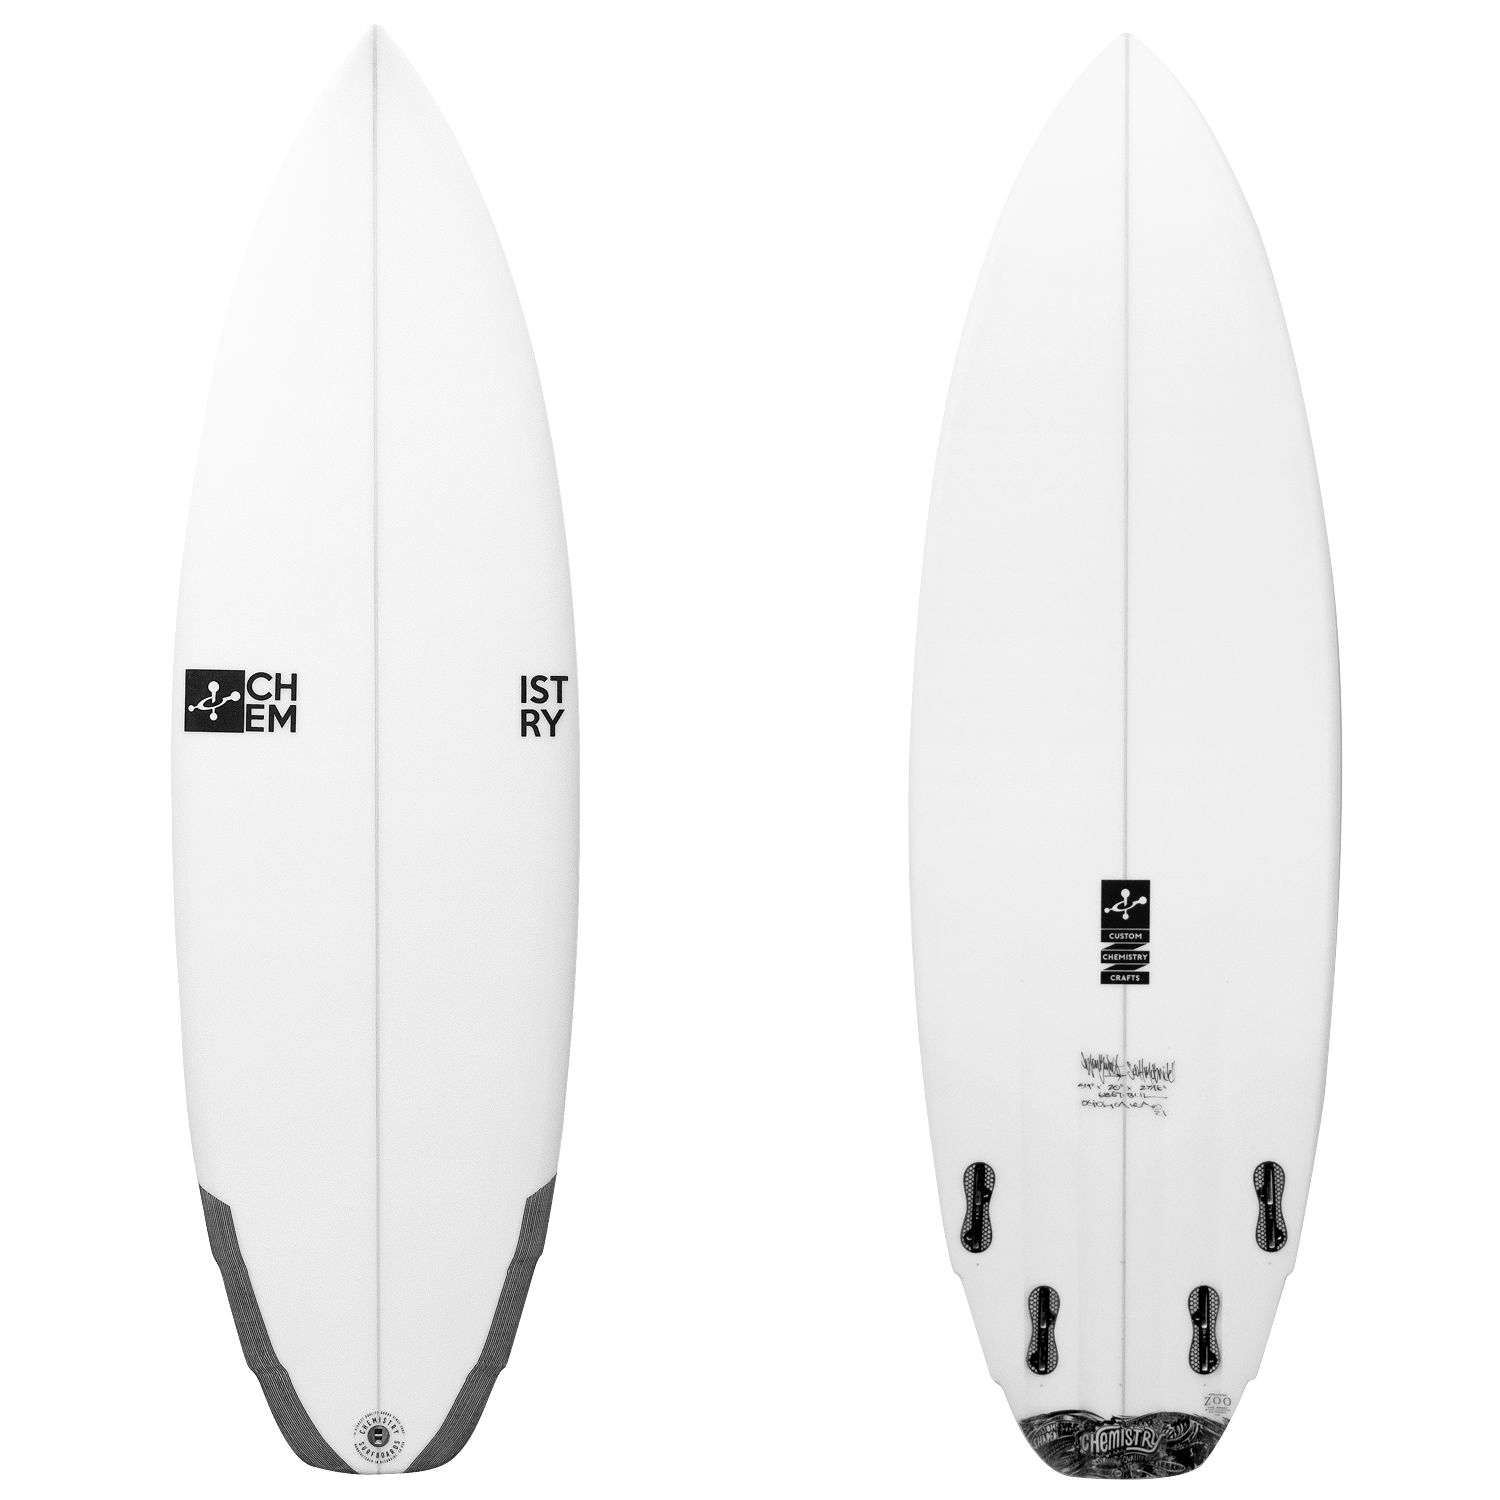 4x4 | Chemistry Surfboards